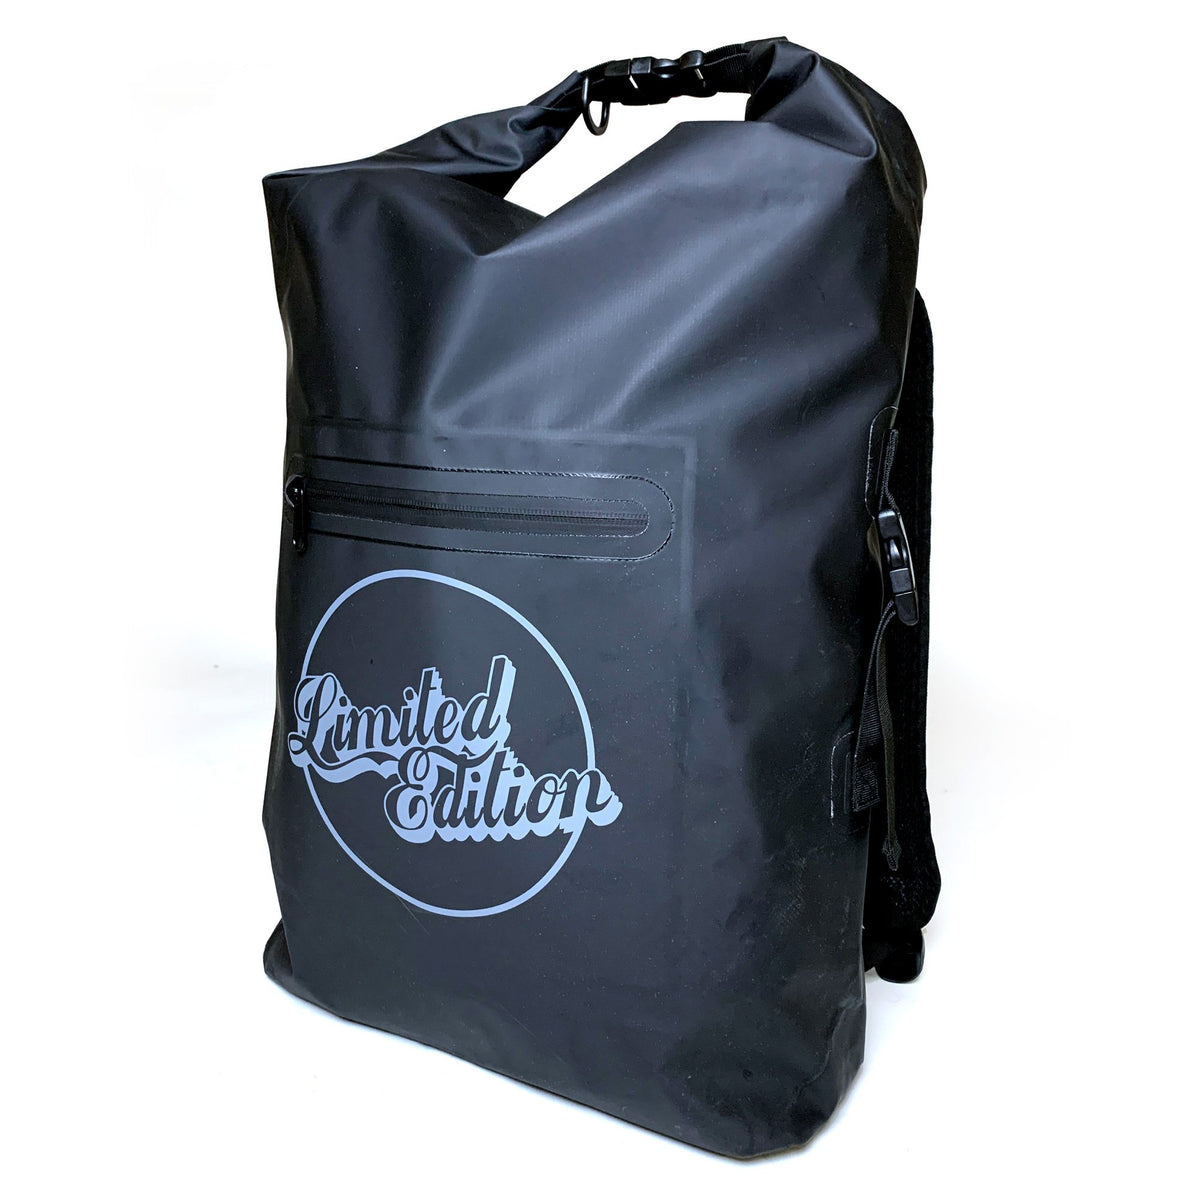 Limited Edition Water Proof Dry Backpack 40L - Nomad Bodyboards